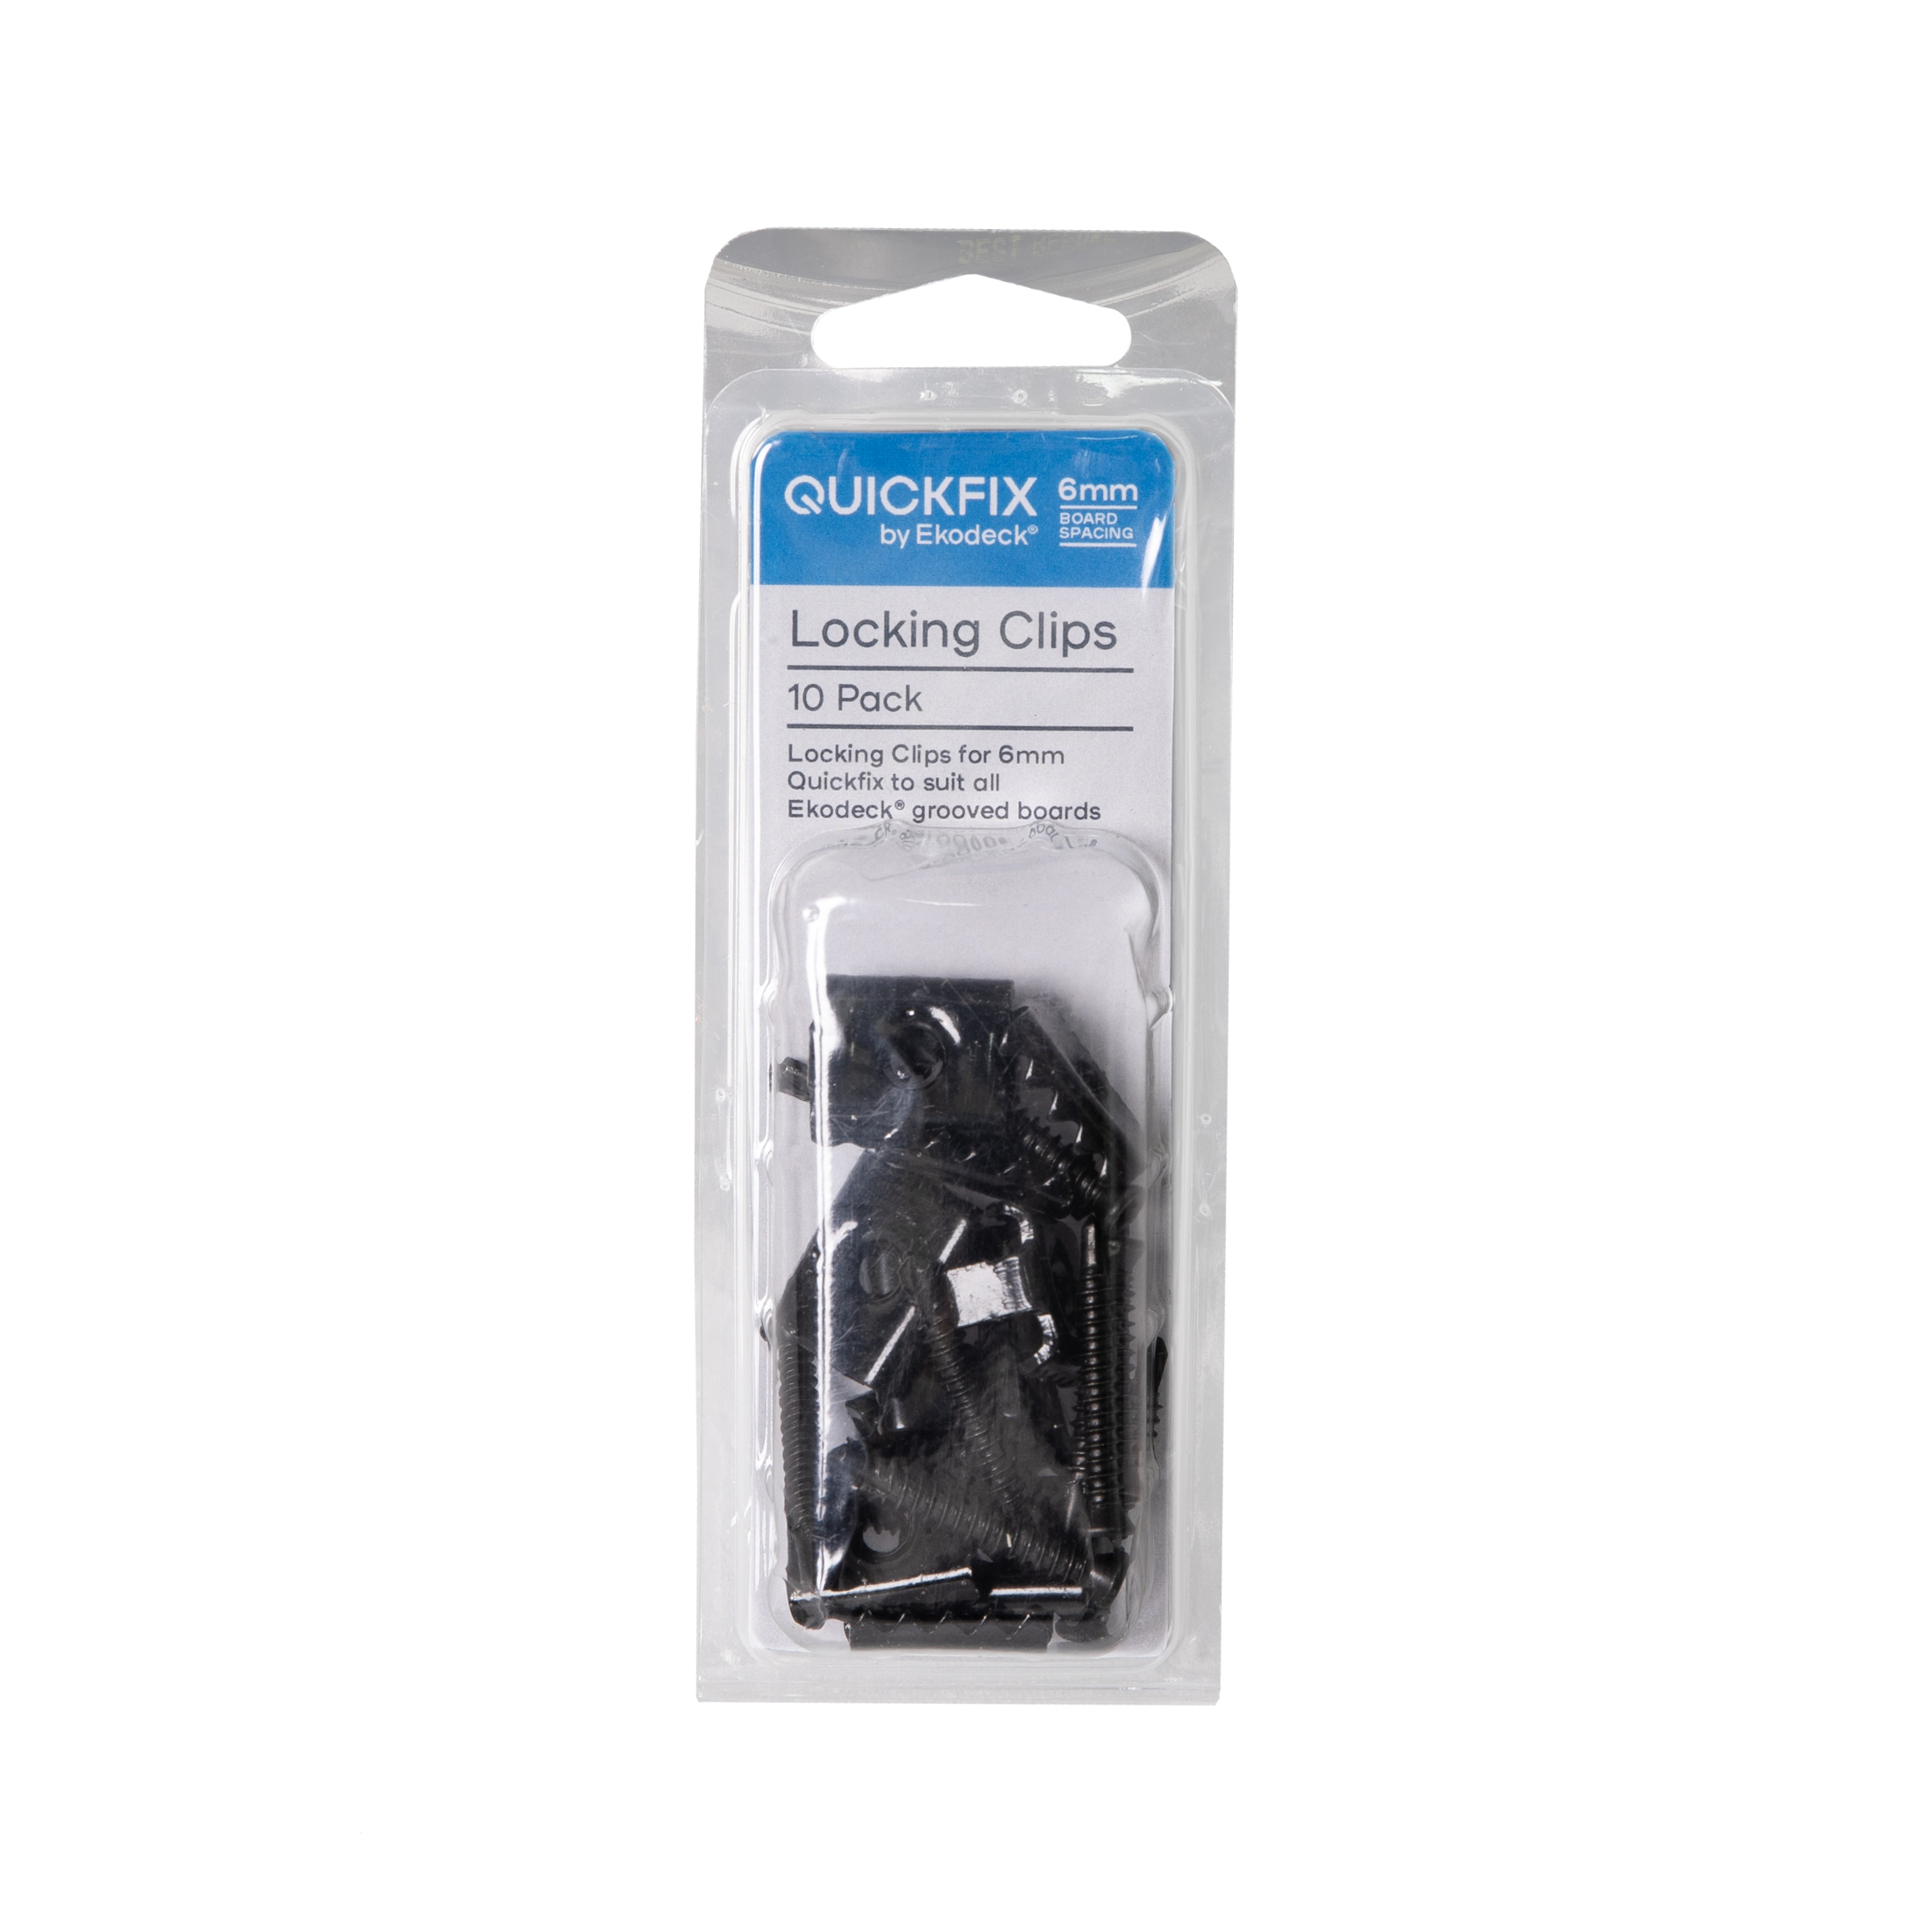 Quickfix for Ekodeck 6mm Locking Clips - 10 Pack